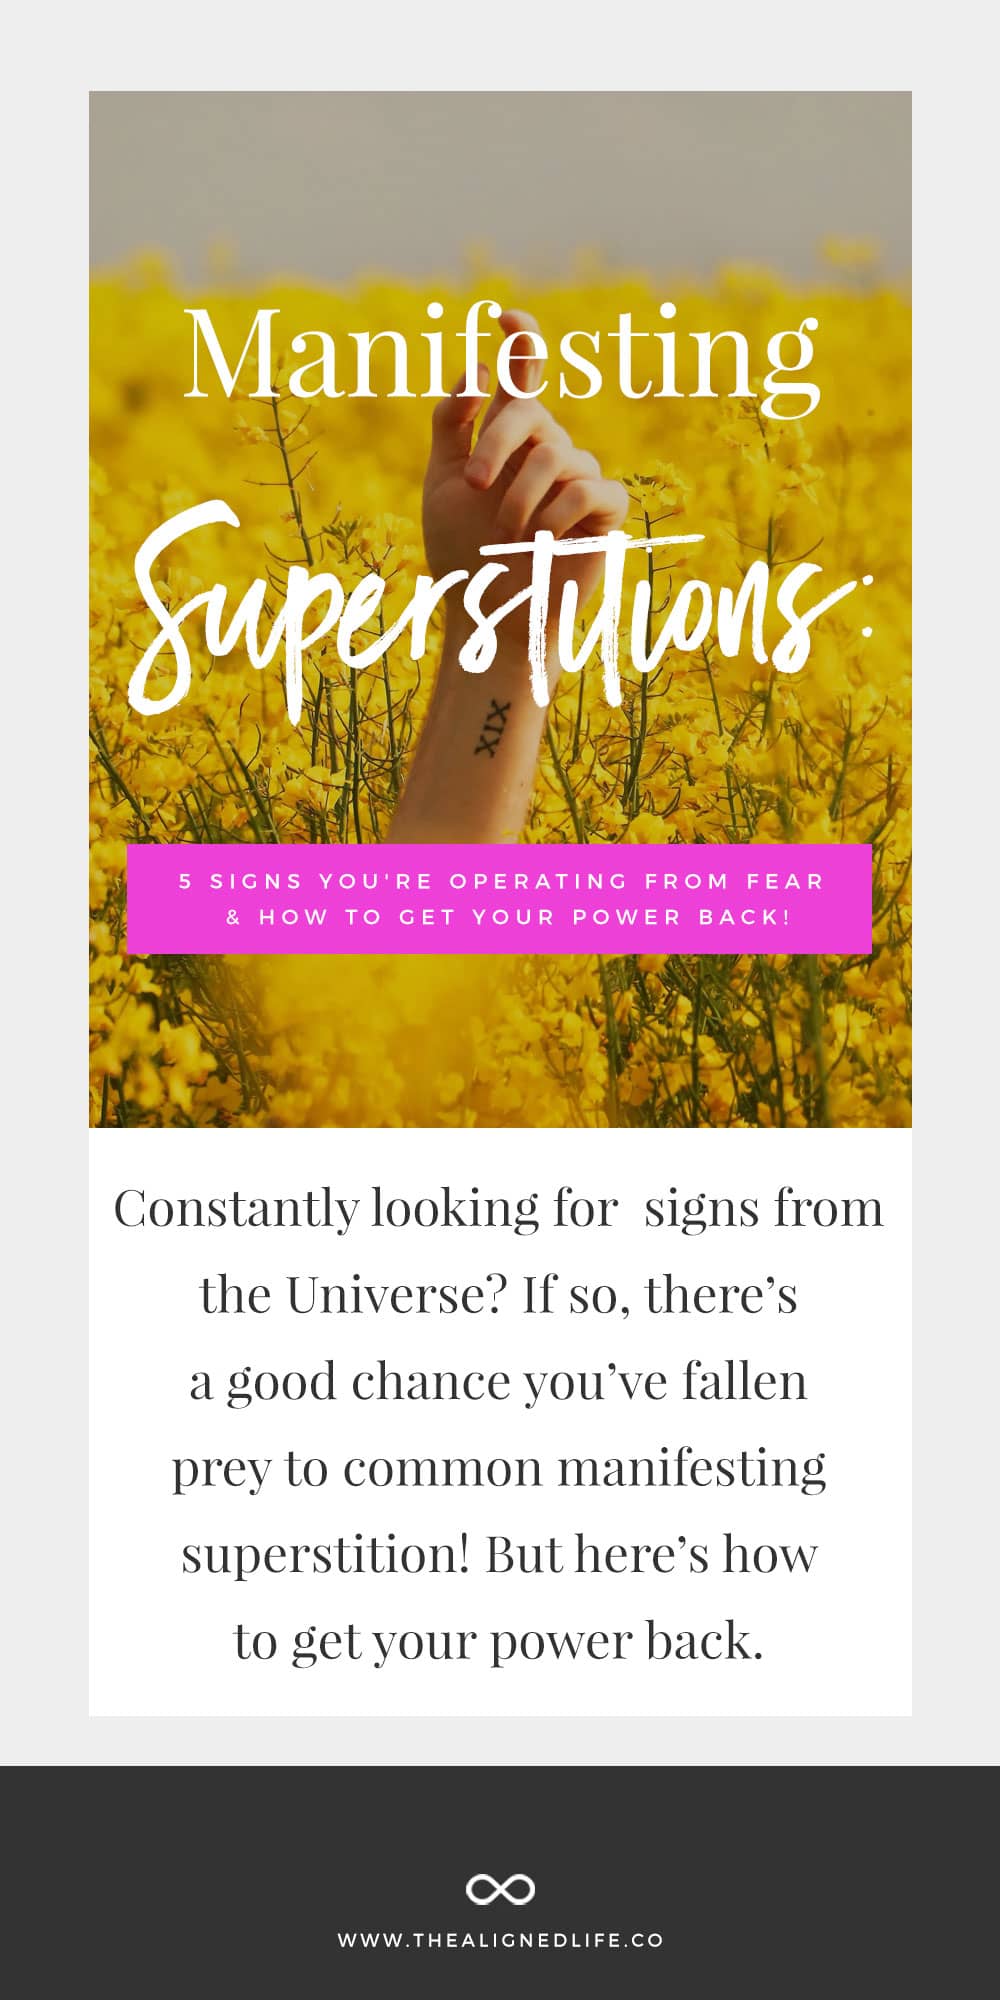 Manifesting Superstitions: 5 Signs You're Operating From Fear & How To Get Your Power Back!